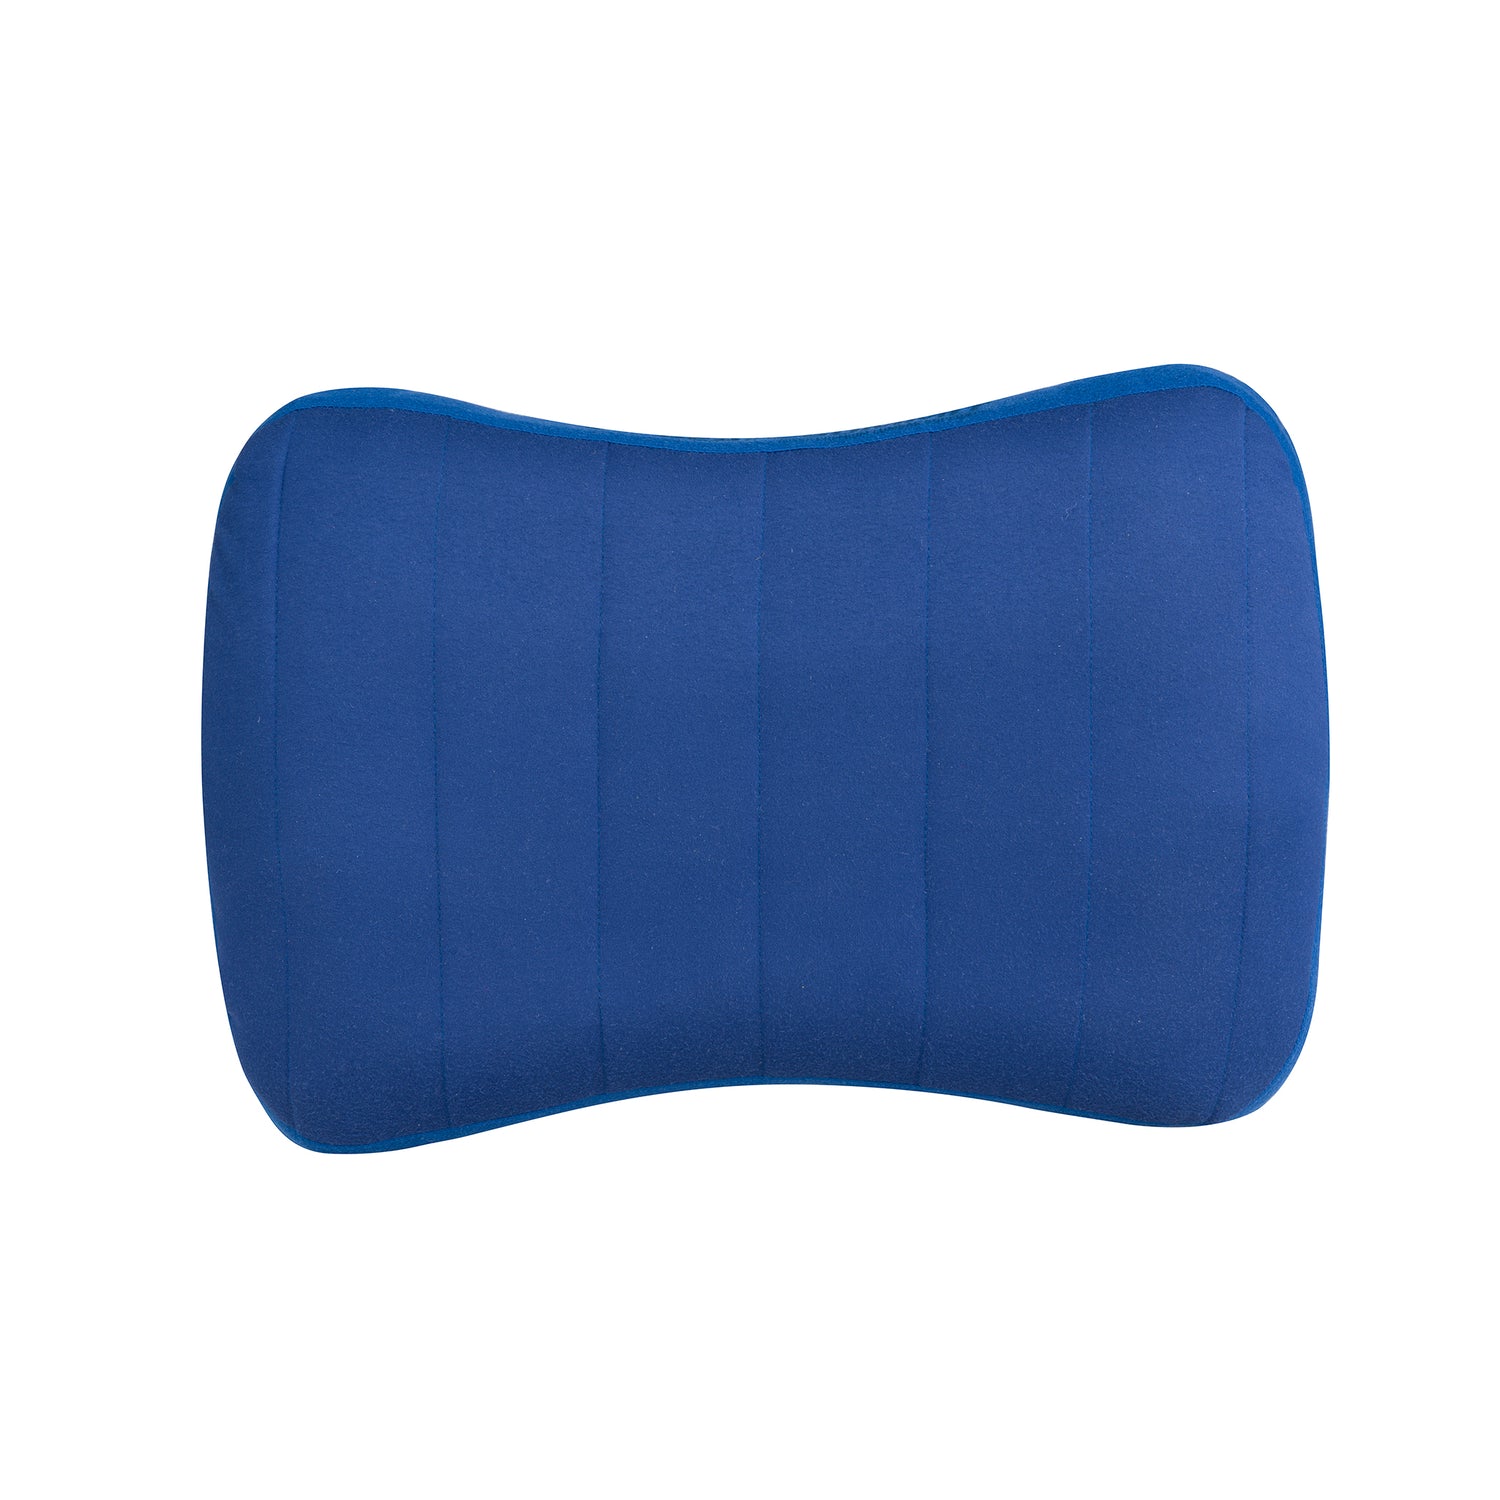 4 Pcs Inflatable Seat Cushions Airplane Seat Cushion Inflatable Cushion for